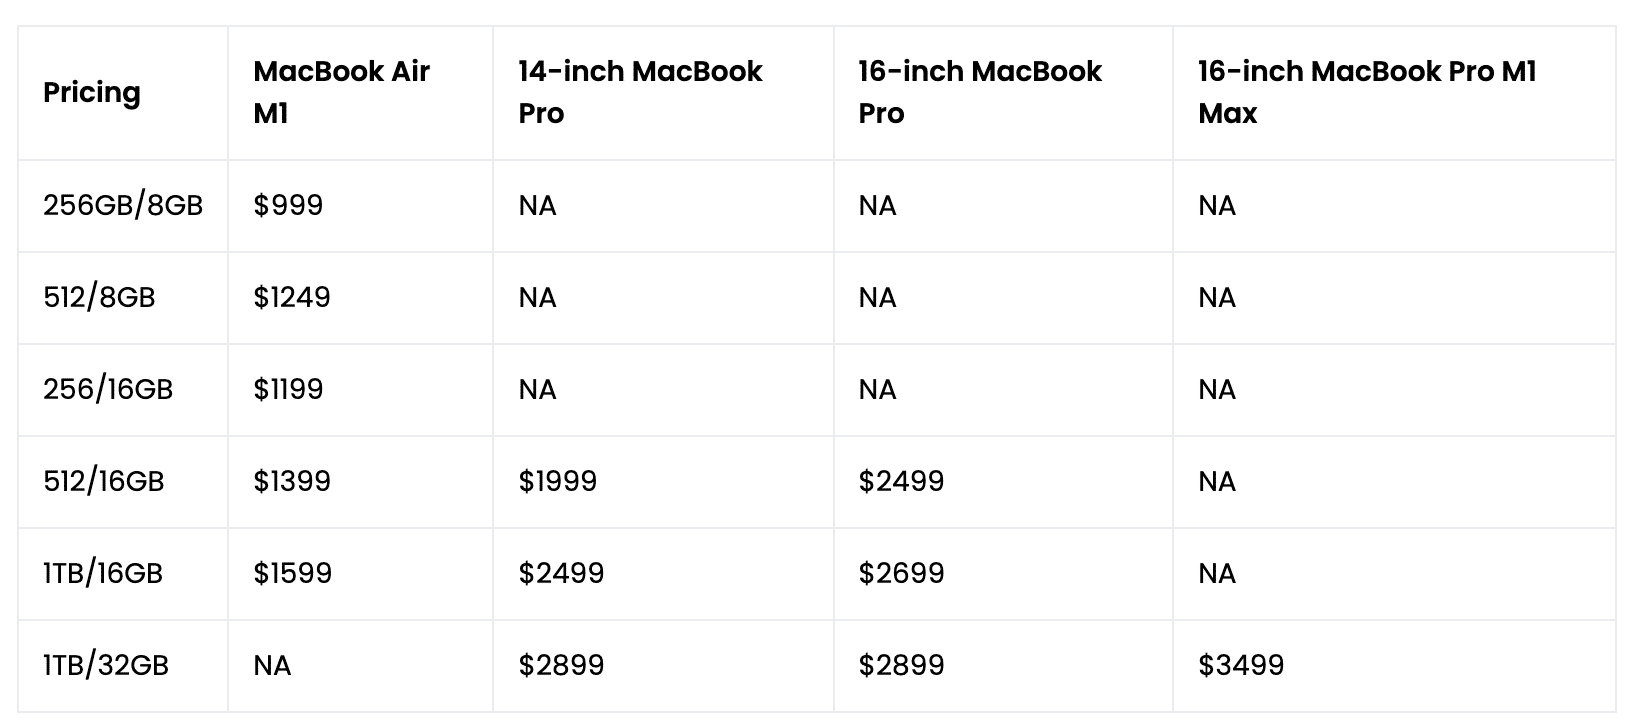 The pricing conundrum Table